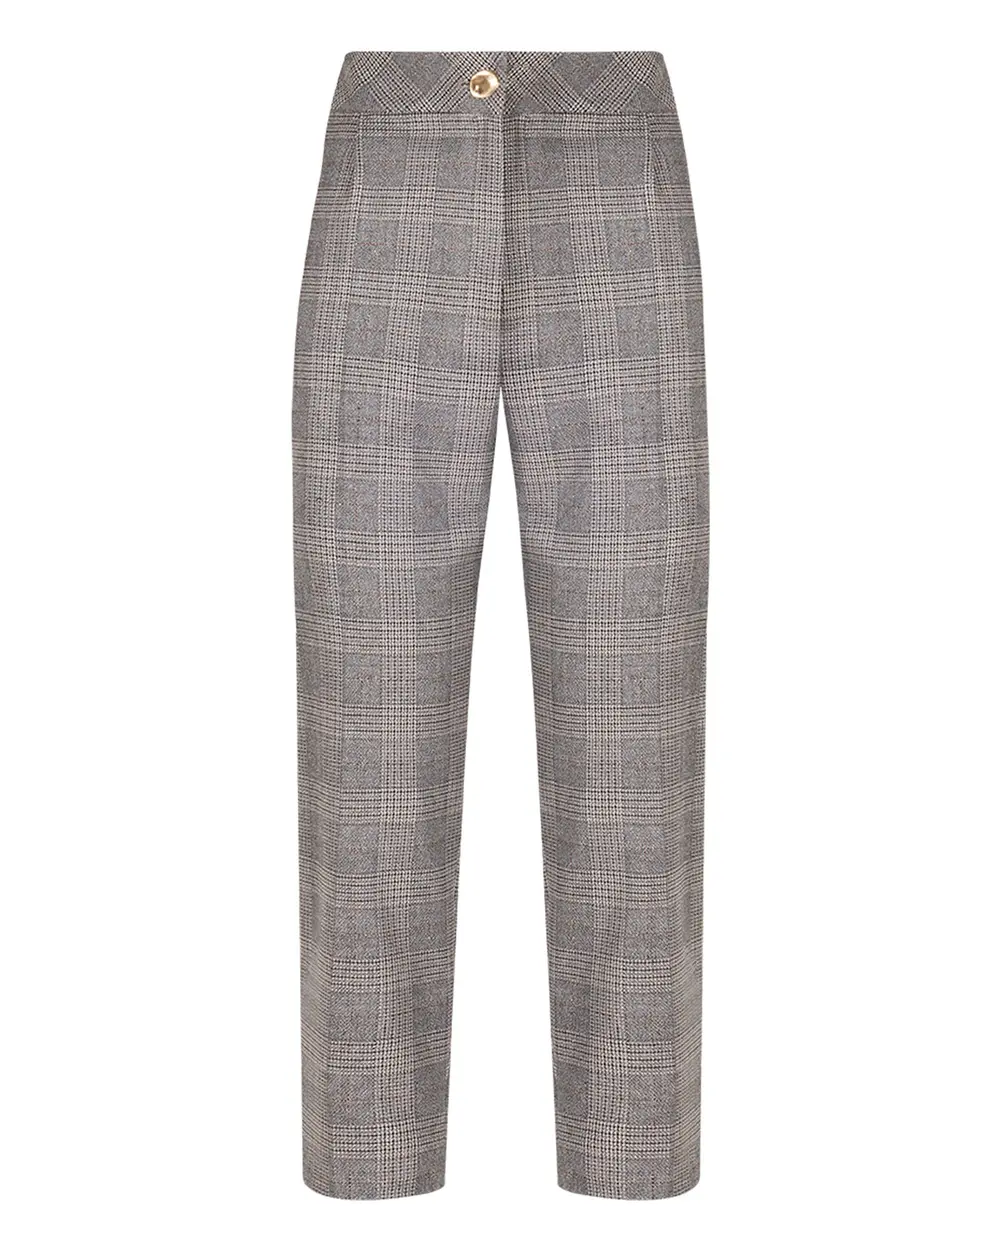 Plaid Patterned Trousers